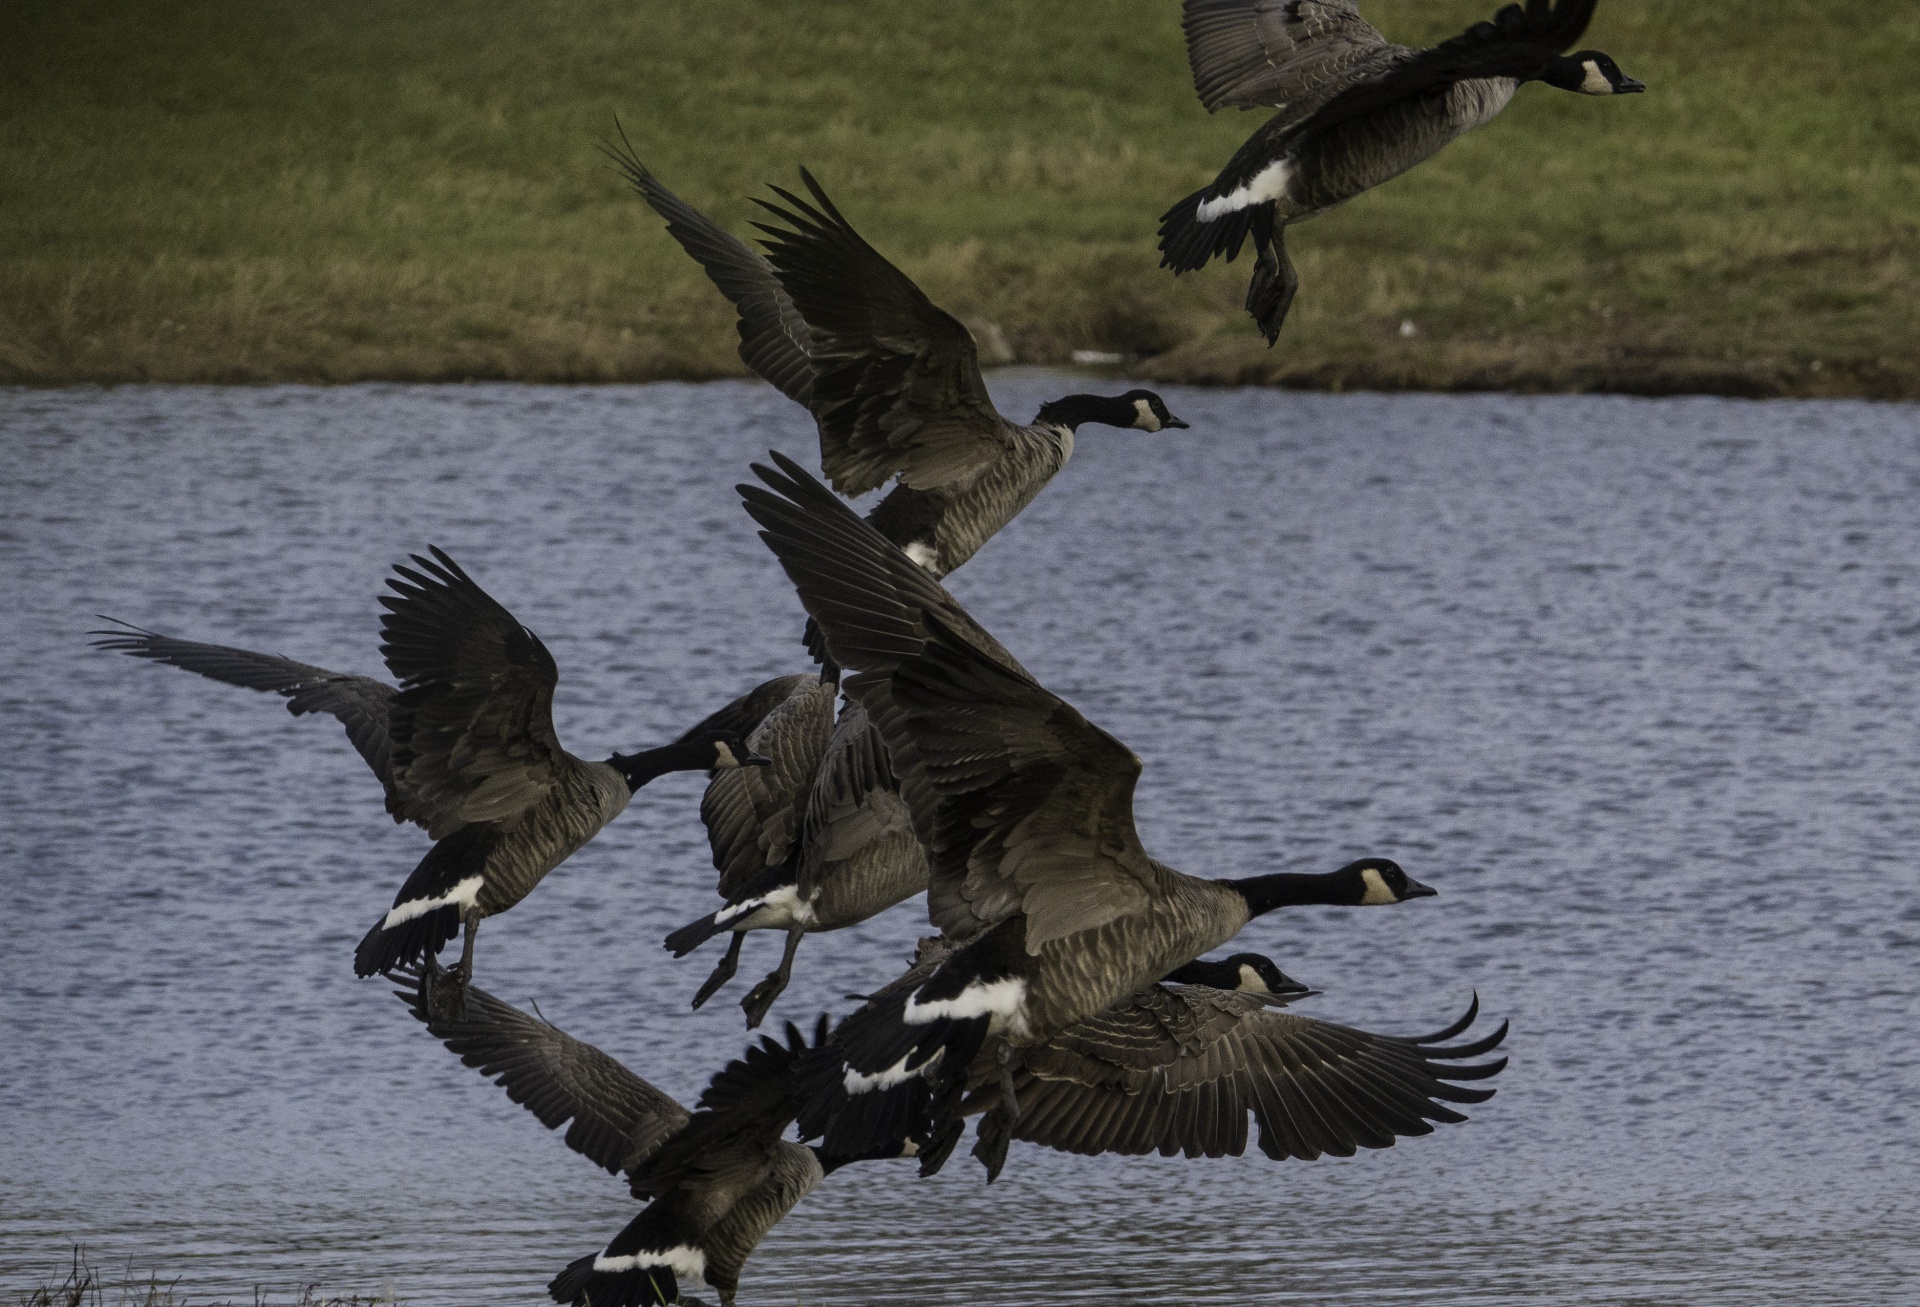 A flock of geese taking off